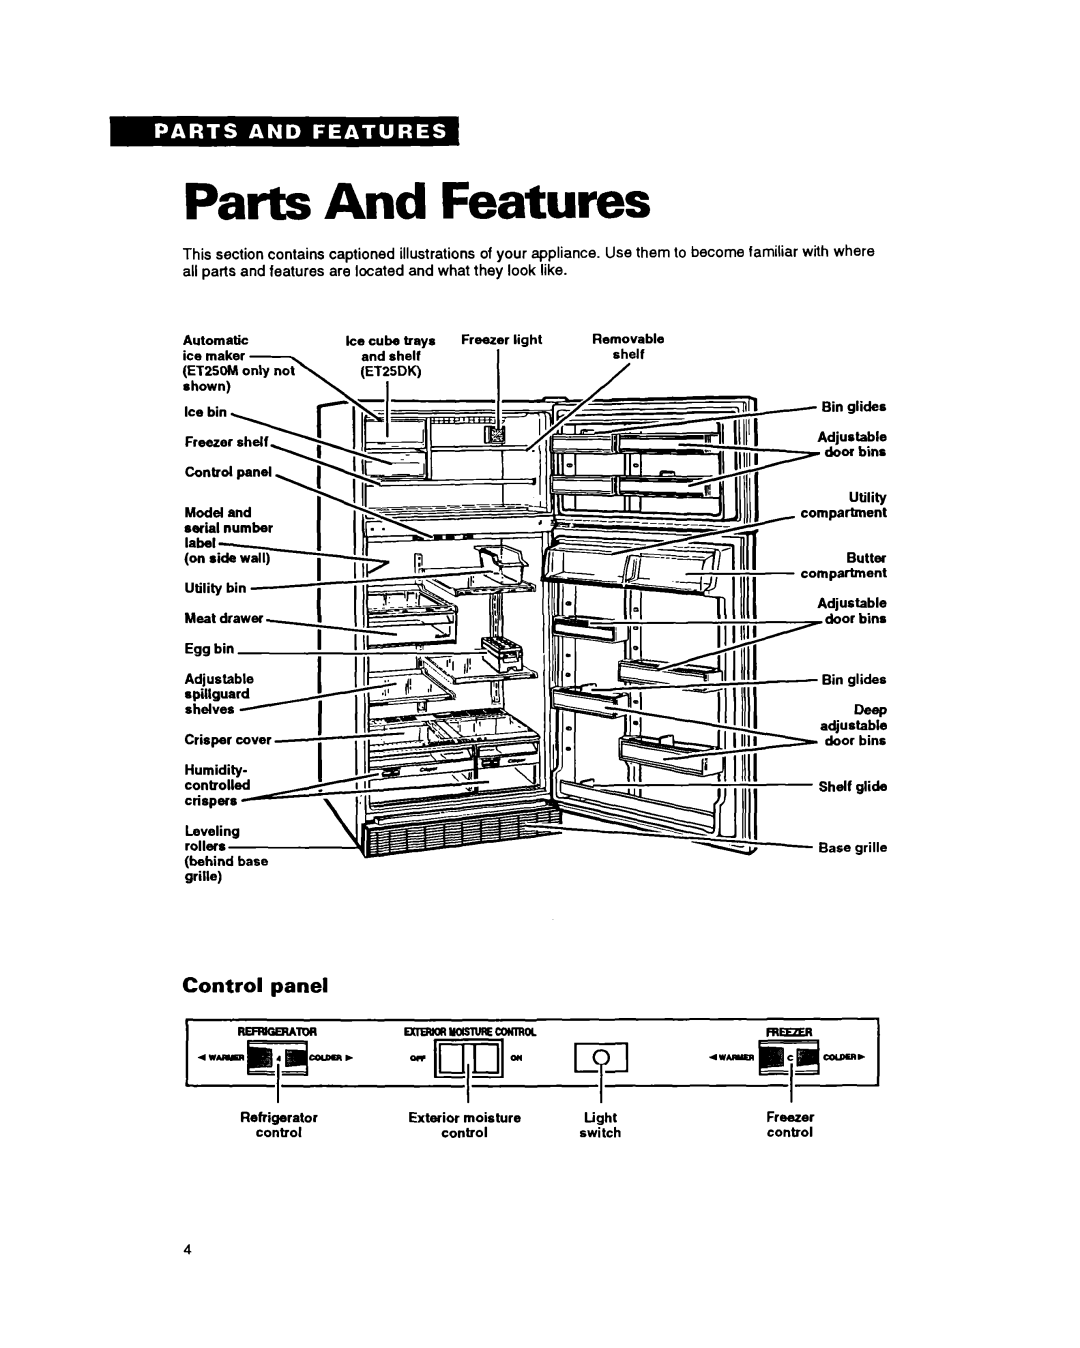 Whirlpool ET25DM warranty Parts And Features, Control panel, Exterior moisture, switch, control, Removable, Light, Freezer 